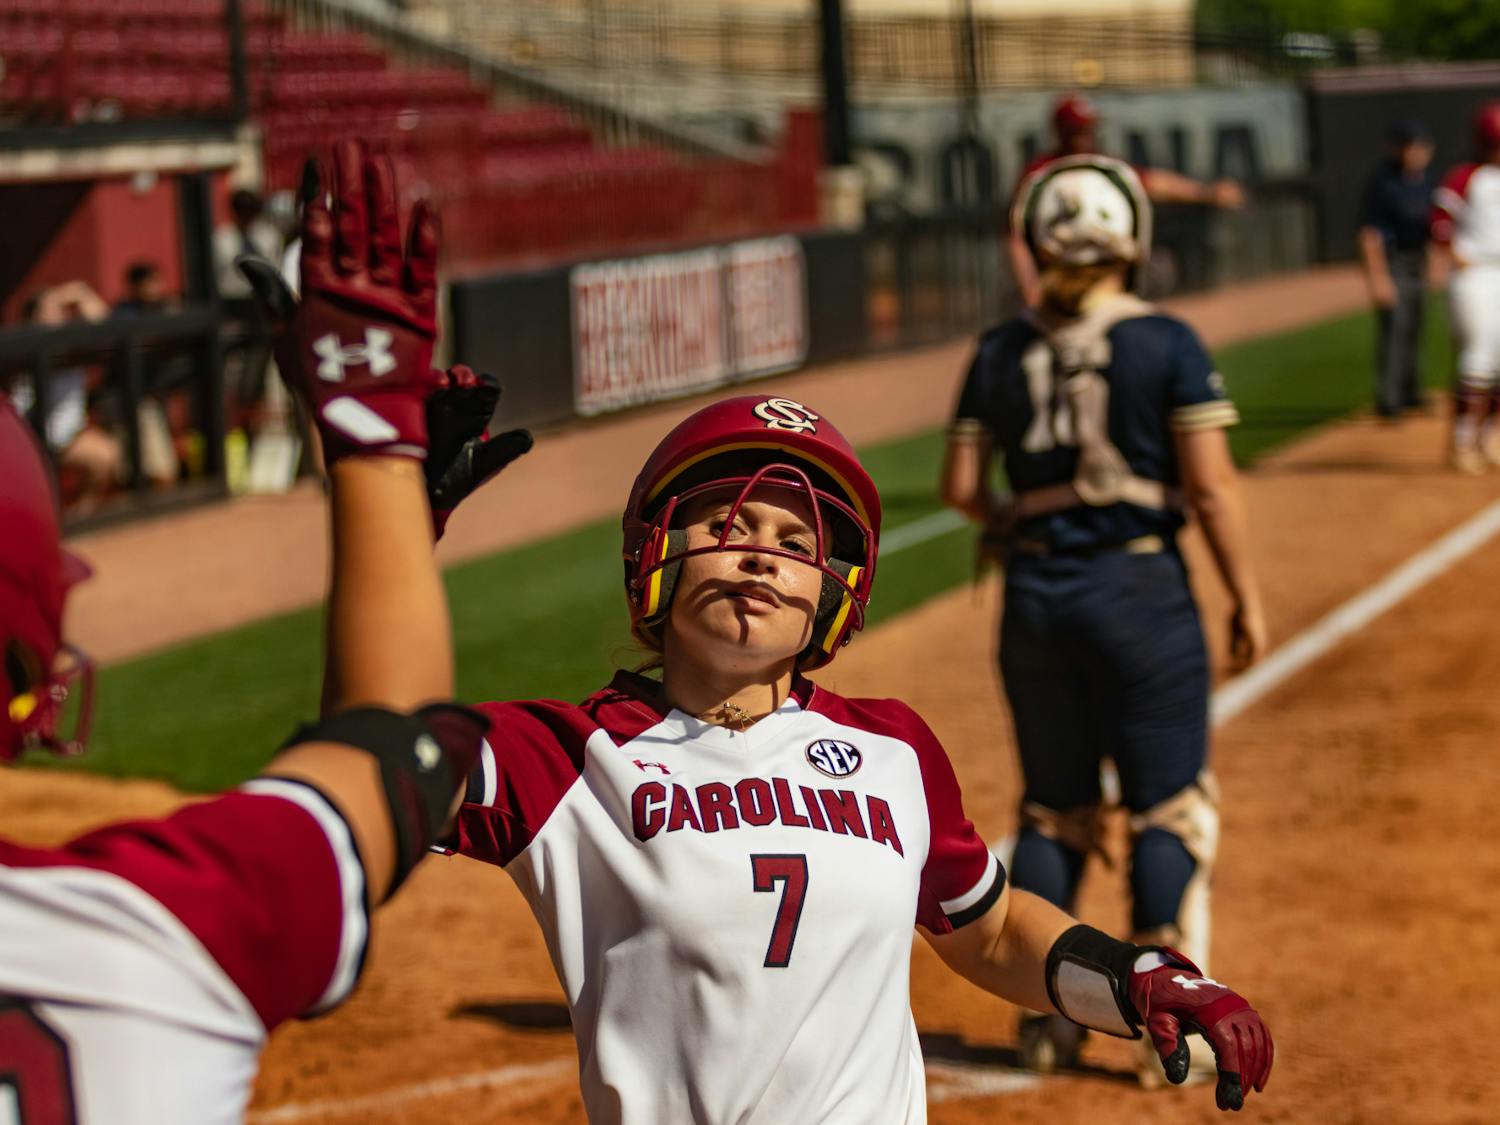 The South Carolina softball team hosted Charleston Southern at Beckham Field in a doubleheader on April 19, 2023. The Gamecocks took both games 5-0 and 11-2 and end their non-conference play with a record of 25-4.